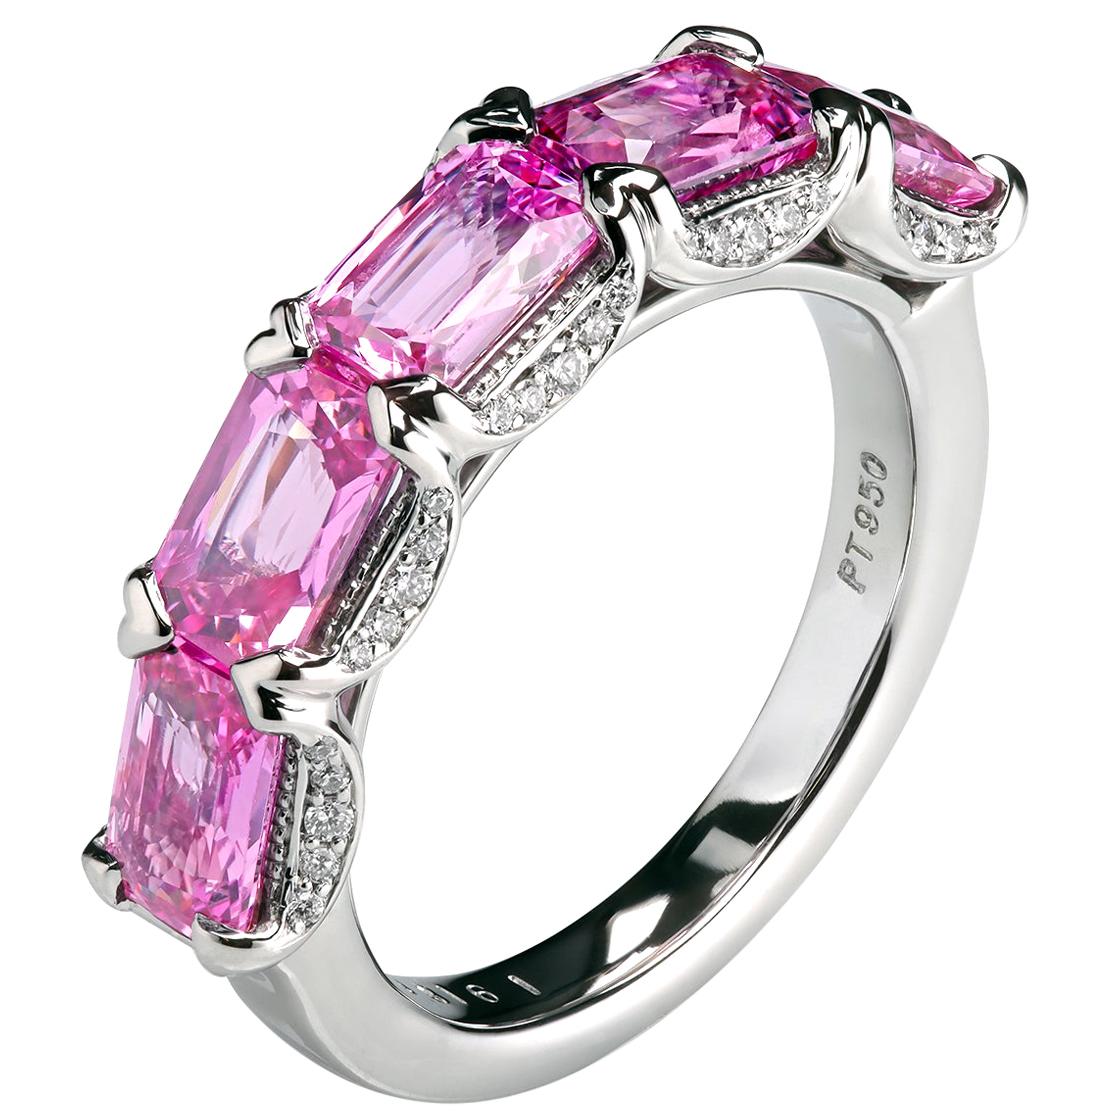 Platinum East West Band with Pink Emerald Cut Natural Sapphires by Leon Mege